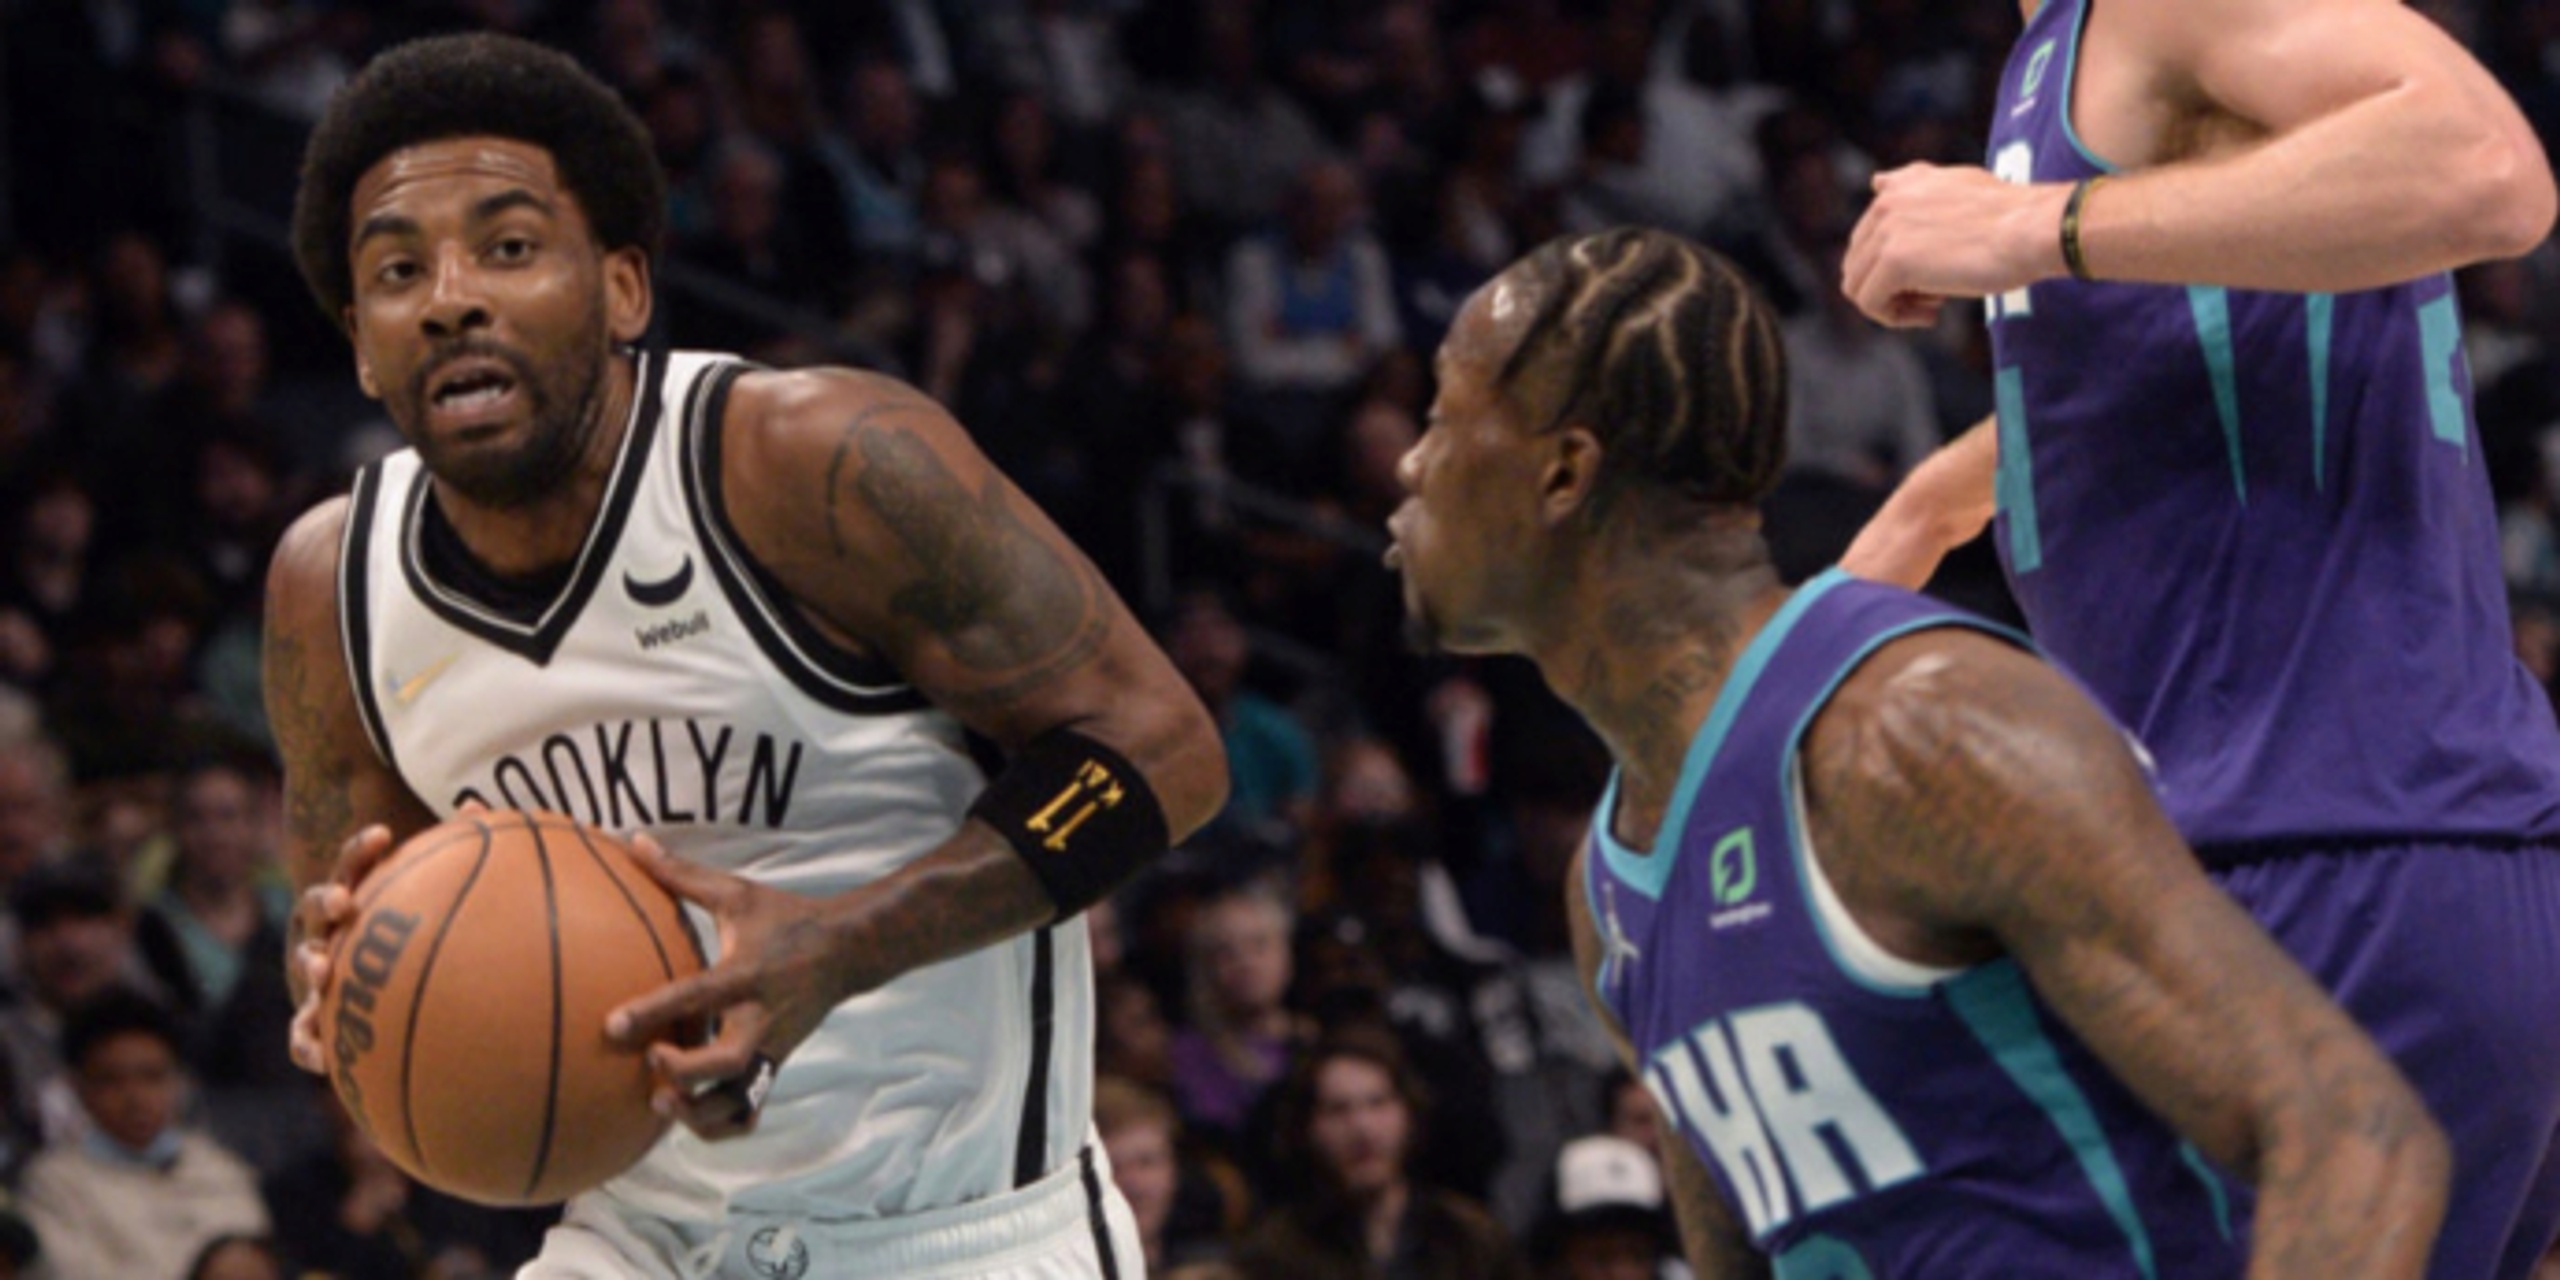 Kyrie Irving scores 50, Nets beat Hornets to snap 4-game skid